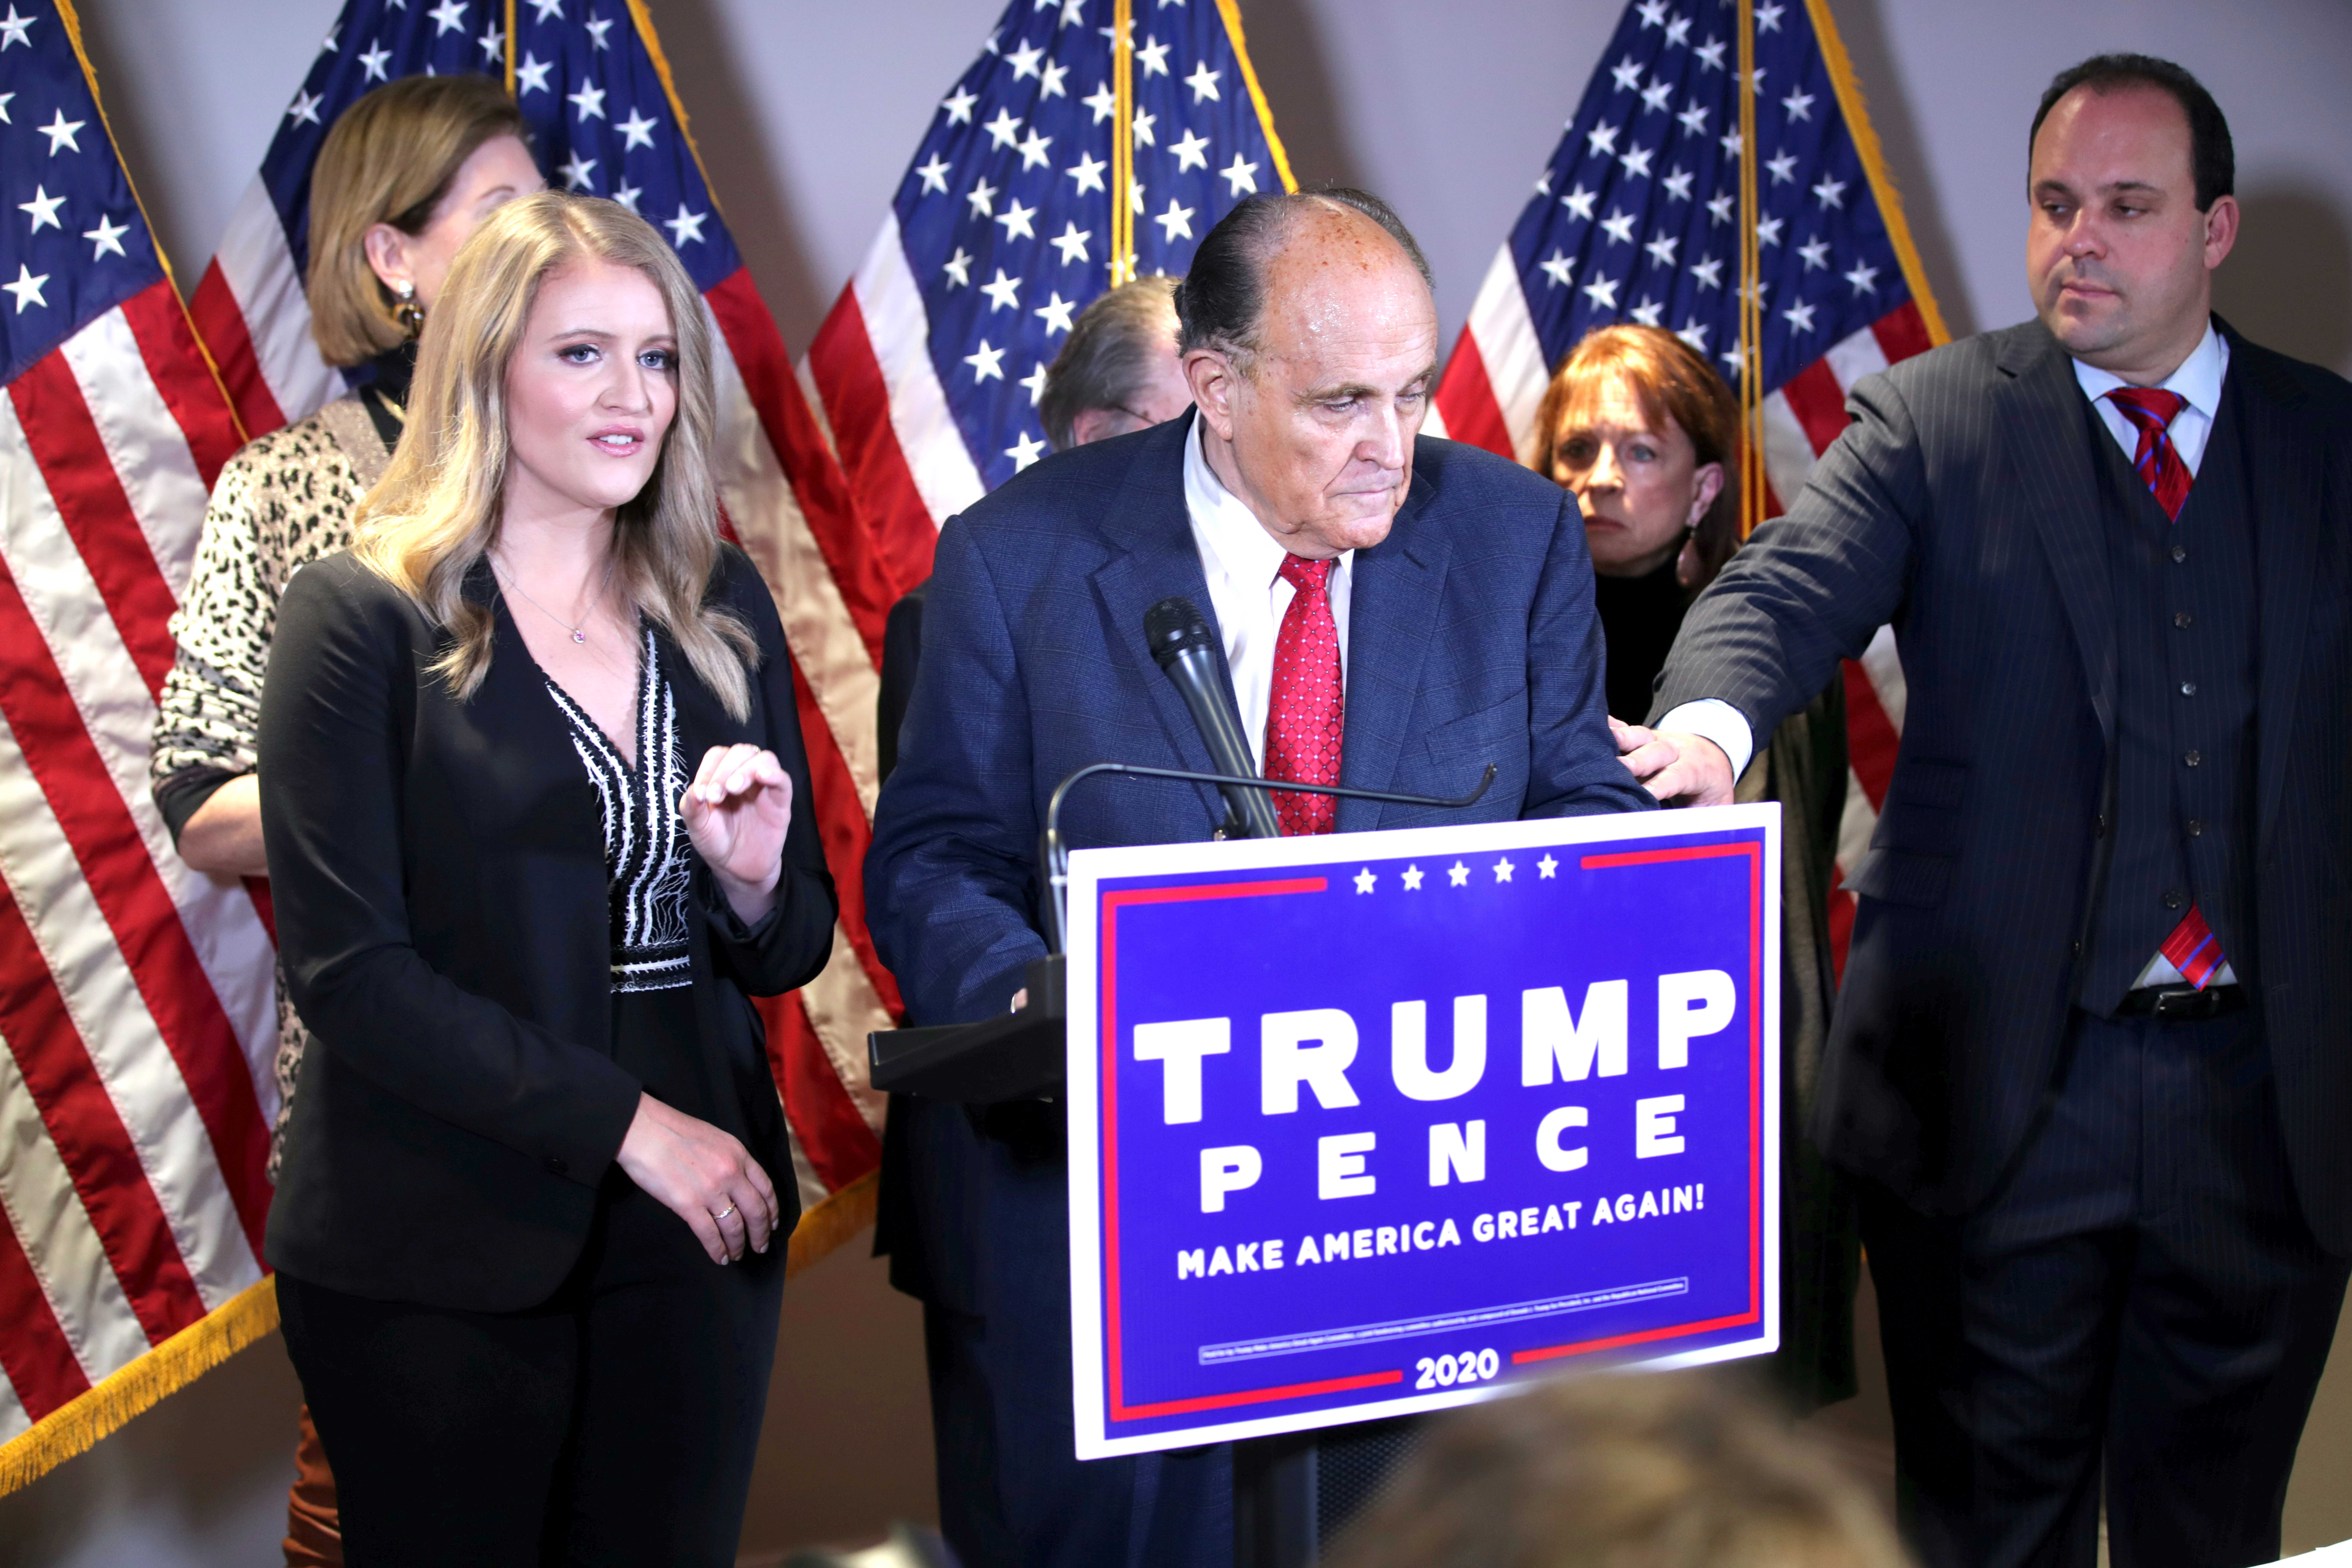 Trump Campaign Senior Legal Advisor Jenna Ellis speaks as Trump campaign advisor Boris Epshteyn reaches out to former New York City Mayor Rudy Giuliani, personal attorney to U.S. President Donald Trump, during a news conference about the 2020 U.S. presidential election results at Republican National Committee headquarters in Washington, U.S., November 19, 2020. REUTERS/Jonathan Ernst/File Photo